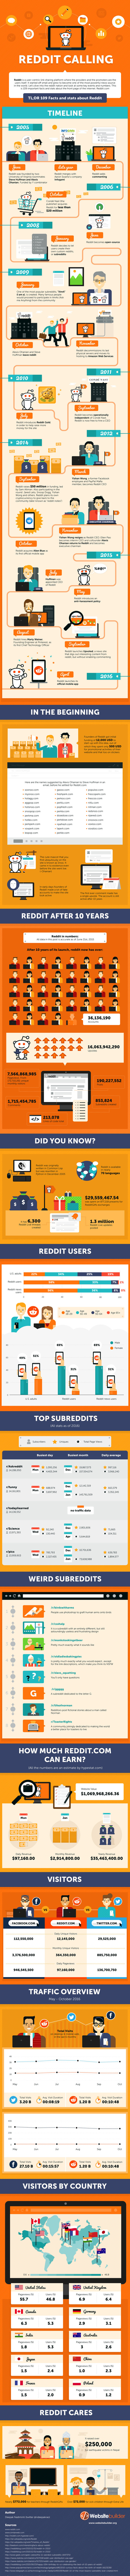 100 Facts and Statistics About Reddit Infographic